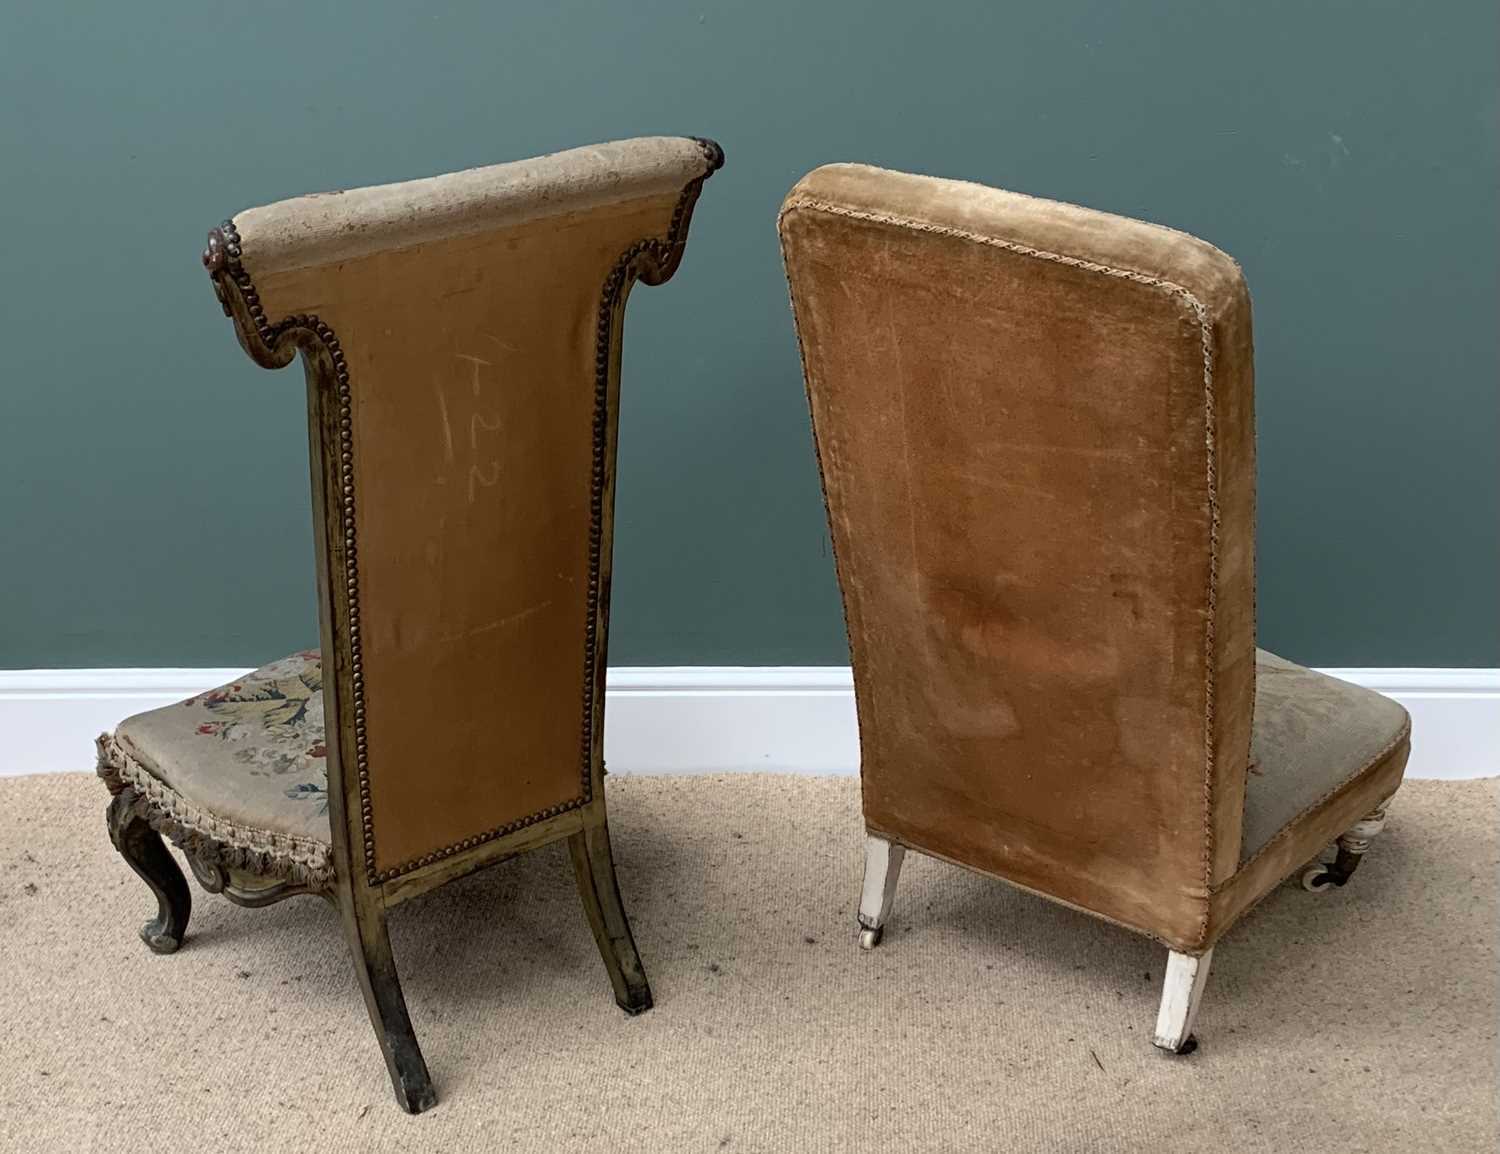 FURNITURE PARCEL - two Victorian nursing chairs, both with floral tapestry upholstery, 99cms H, - Image 3 of 8